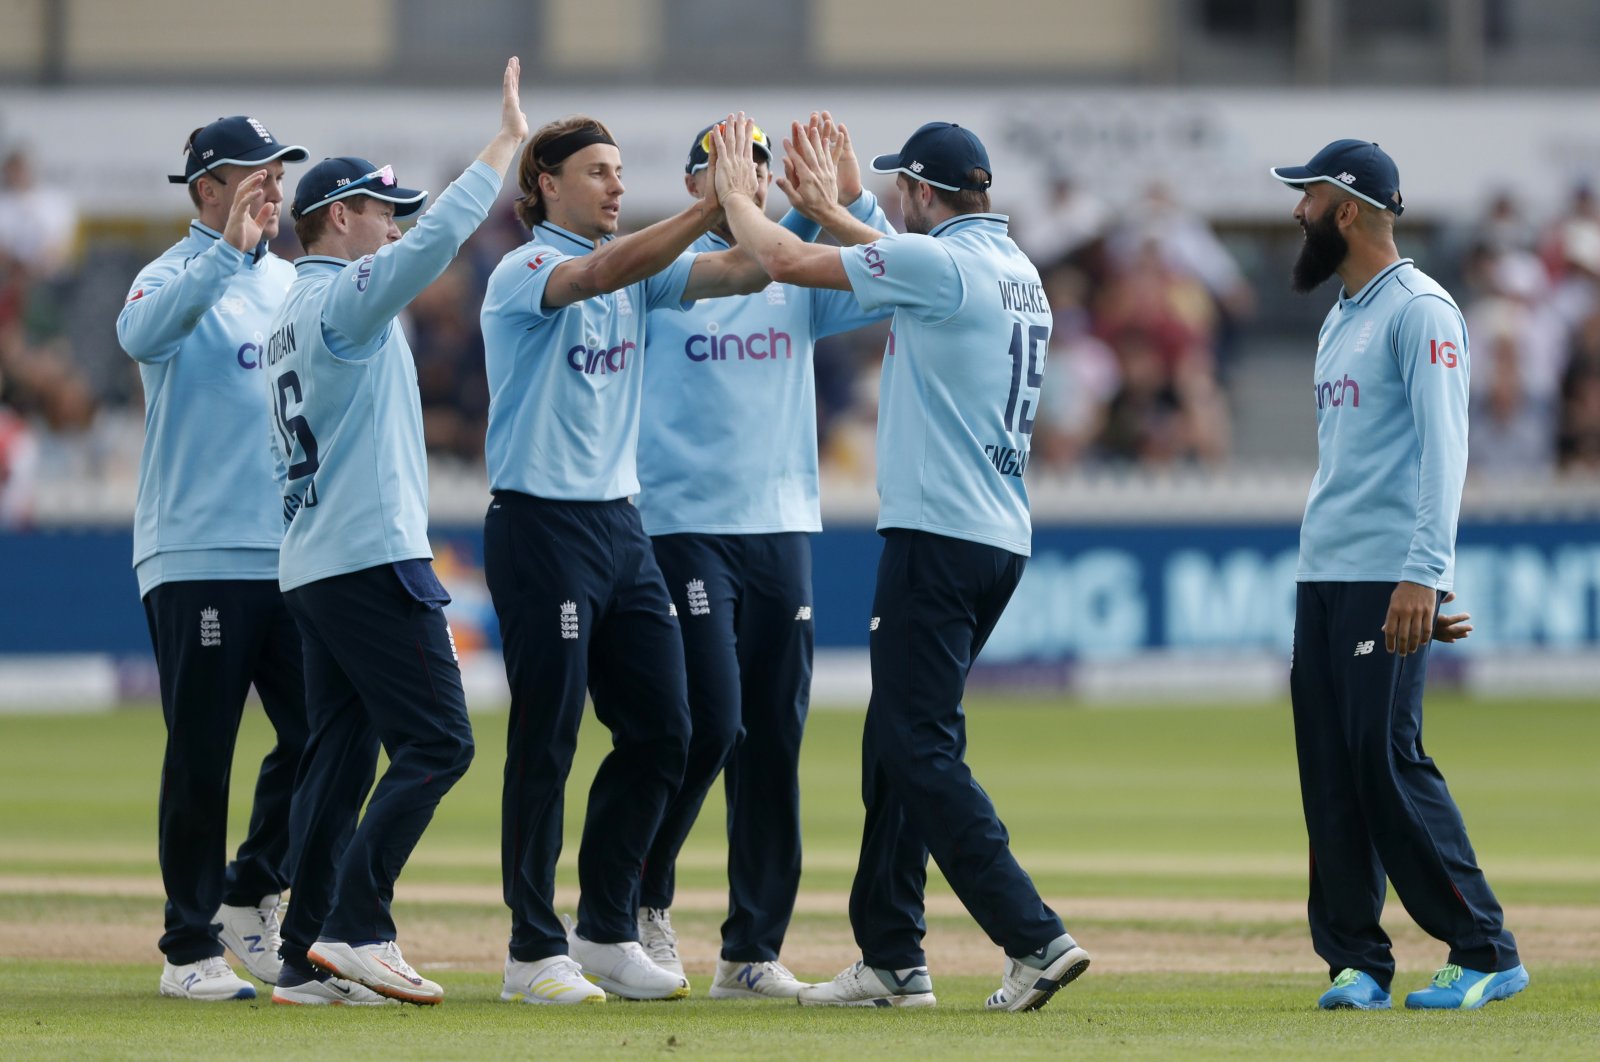 England's Chris Woakes (2nd R) celebrates with teammates after taking a catch to dismiss Sri Lanka's Oshada Fernando off the bowling of Tom Curran during an ODI at Bristol County Ground, Bristol, U.K., July 4, 2021. (Reuters Photo)